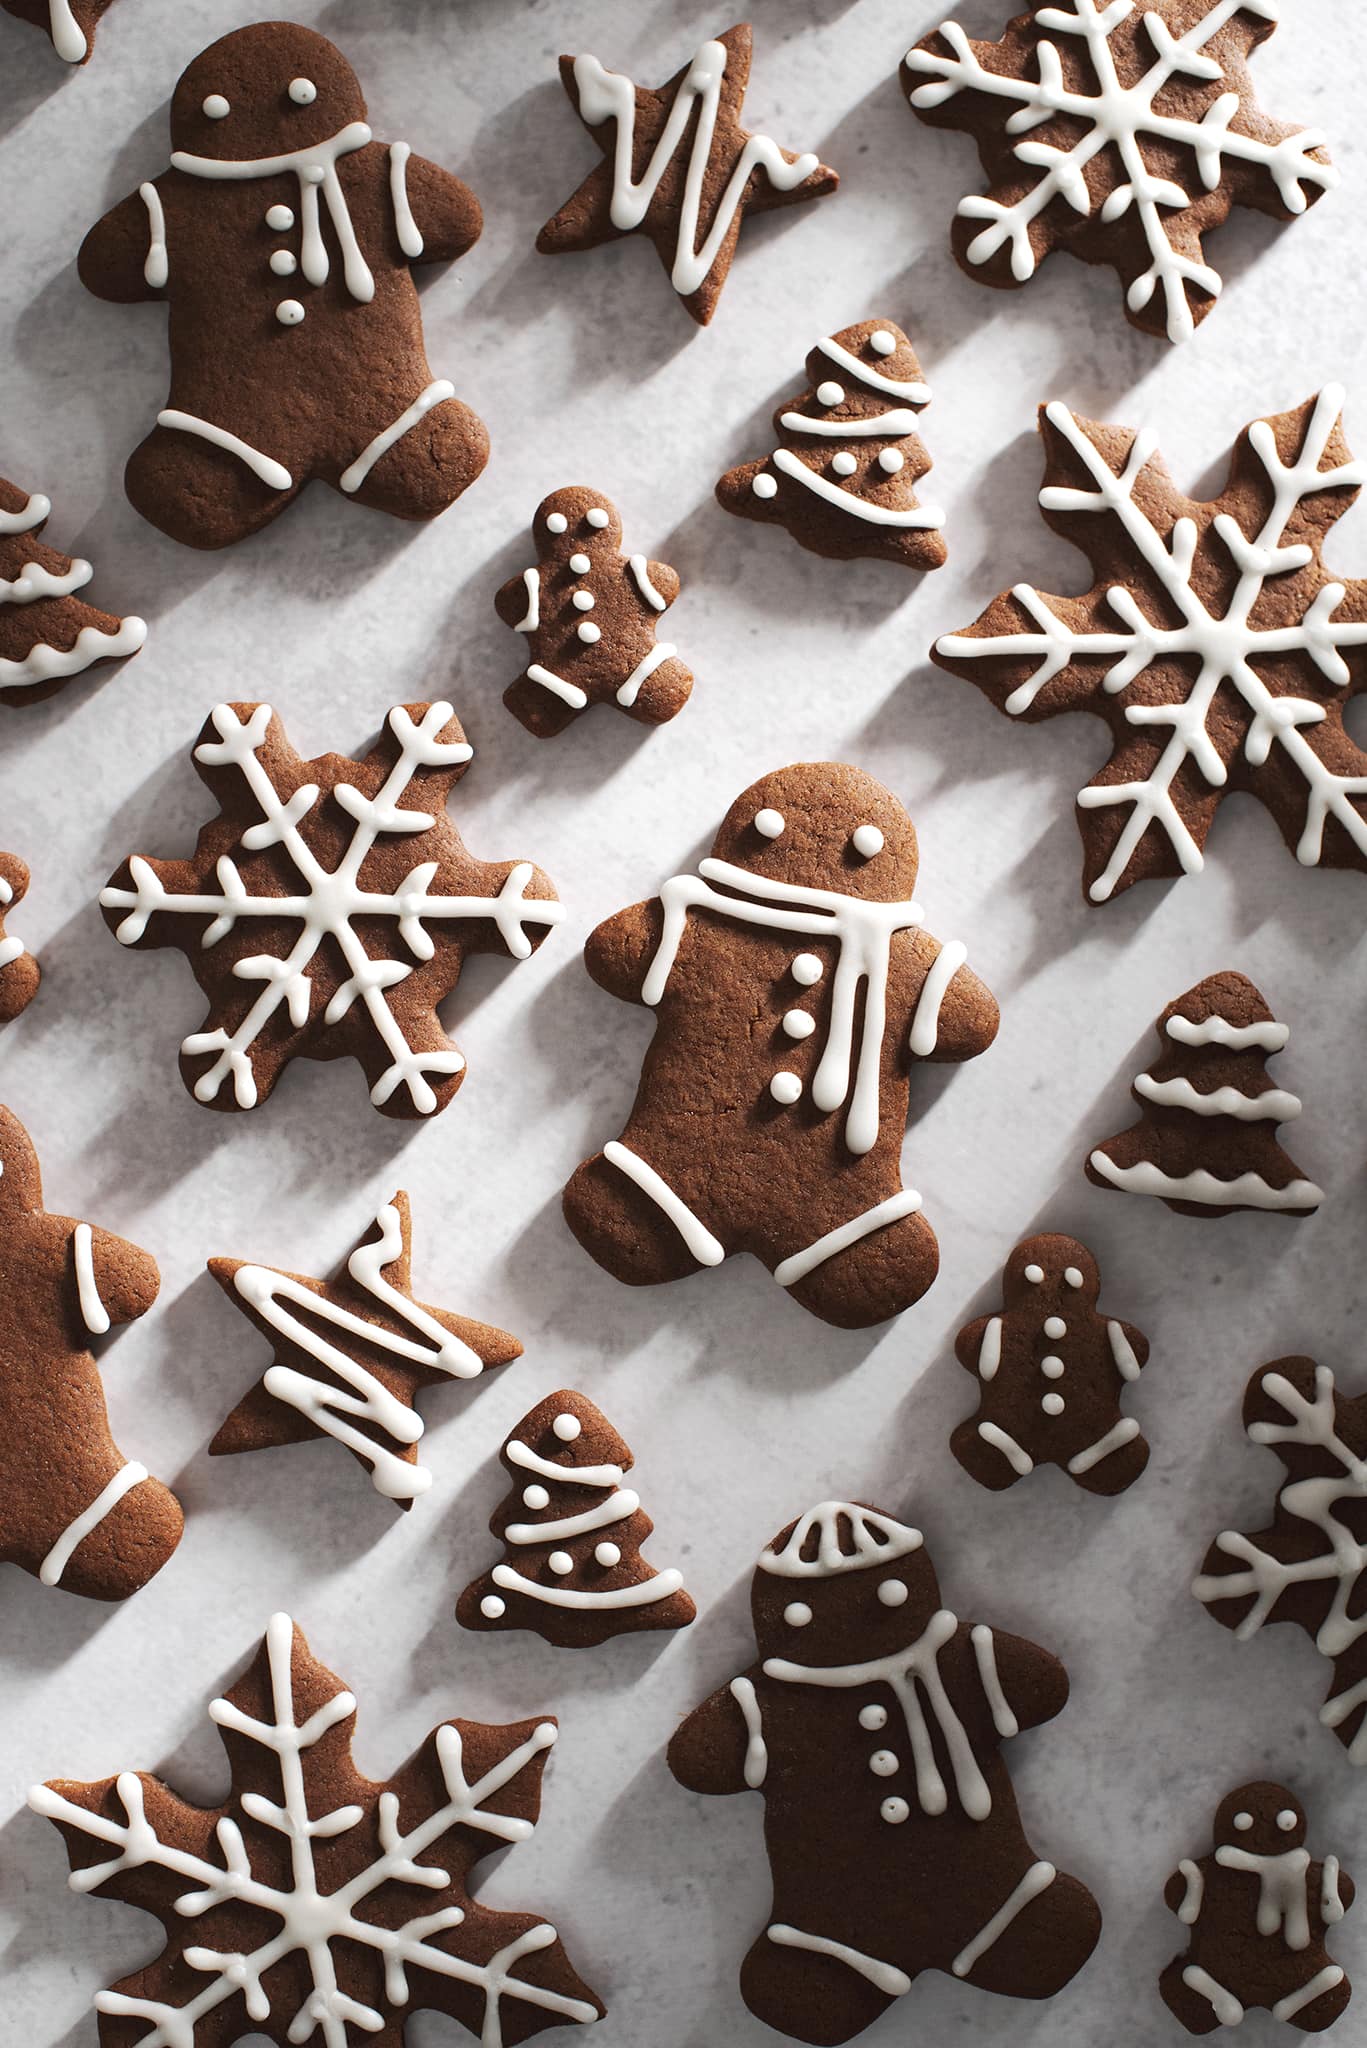 decorated gingerbread men and snowflakes on grey surface